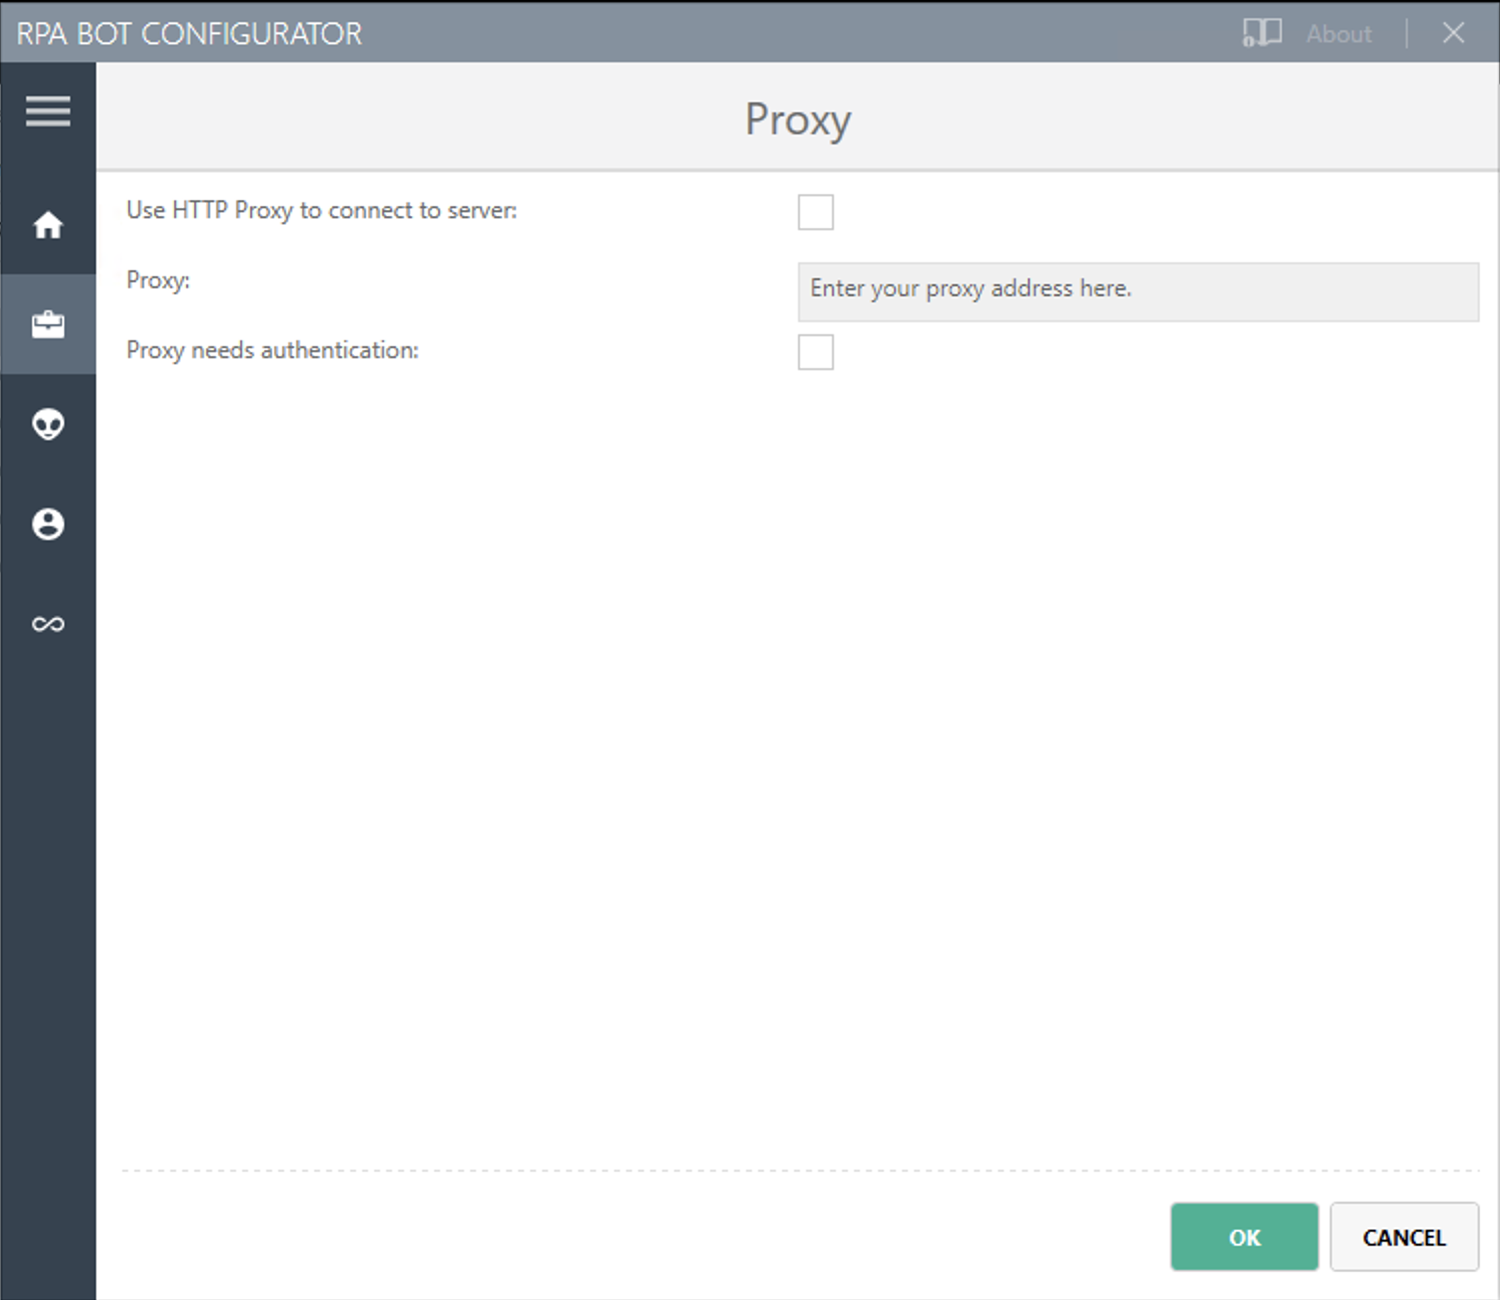 The RPA Bot Configurator application showing the Proxy settings panel